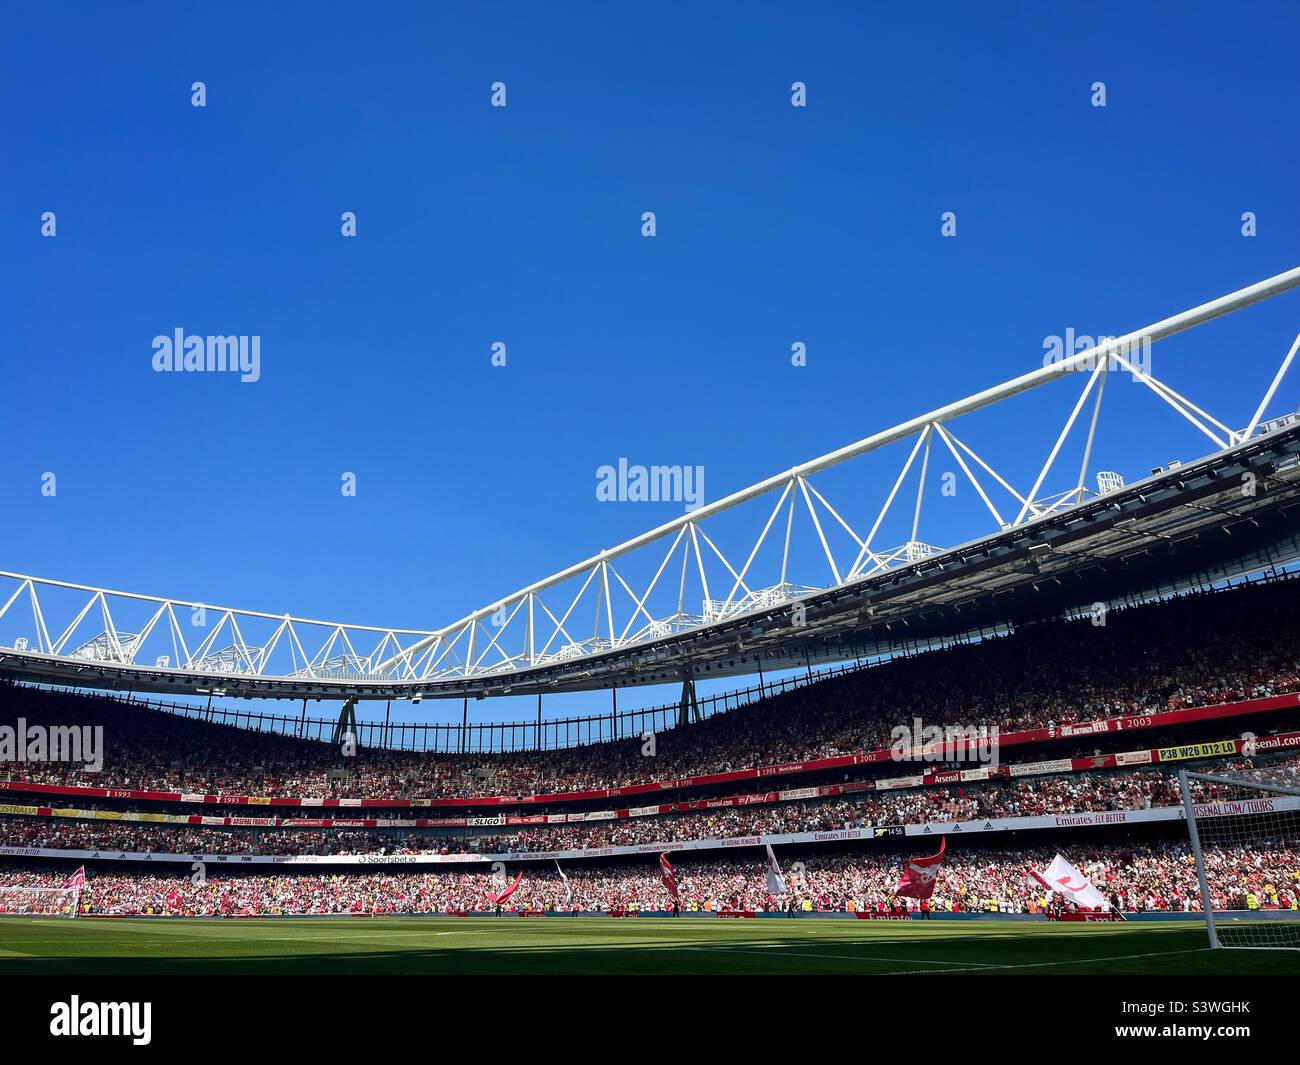 A general view of the Emirates stadium, home to Arsenal Football Club during their first home game of the 2022-23 Premier League football season. Stock Photo